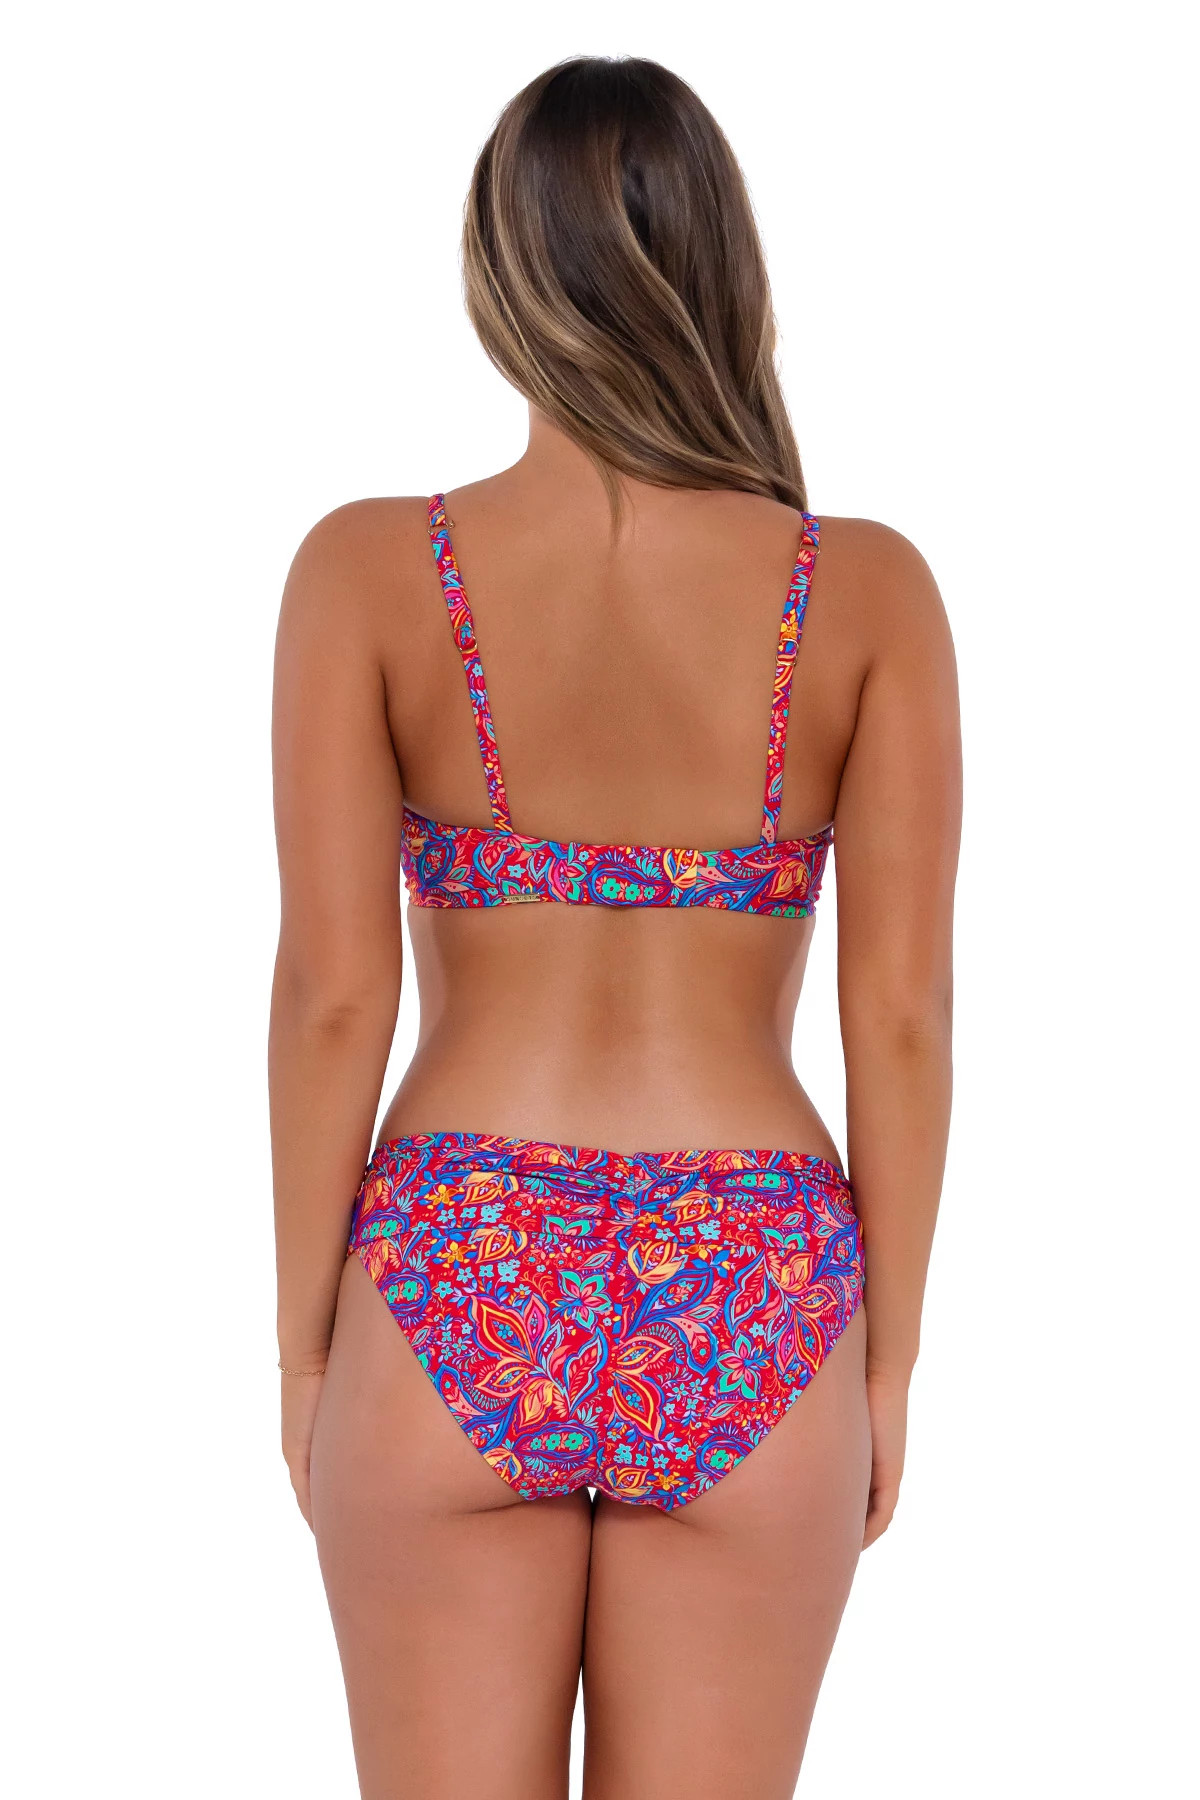 RUE PAISLEY Crossroads Underwire Bikini Top (D+ Cup) image number 2